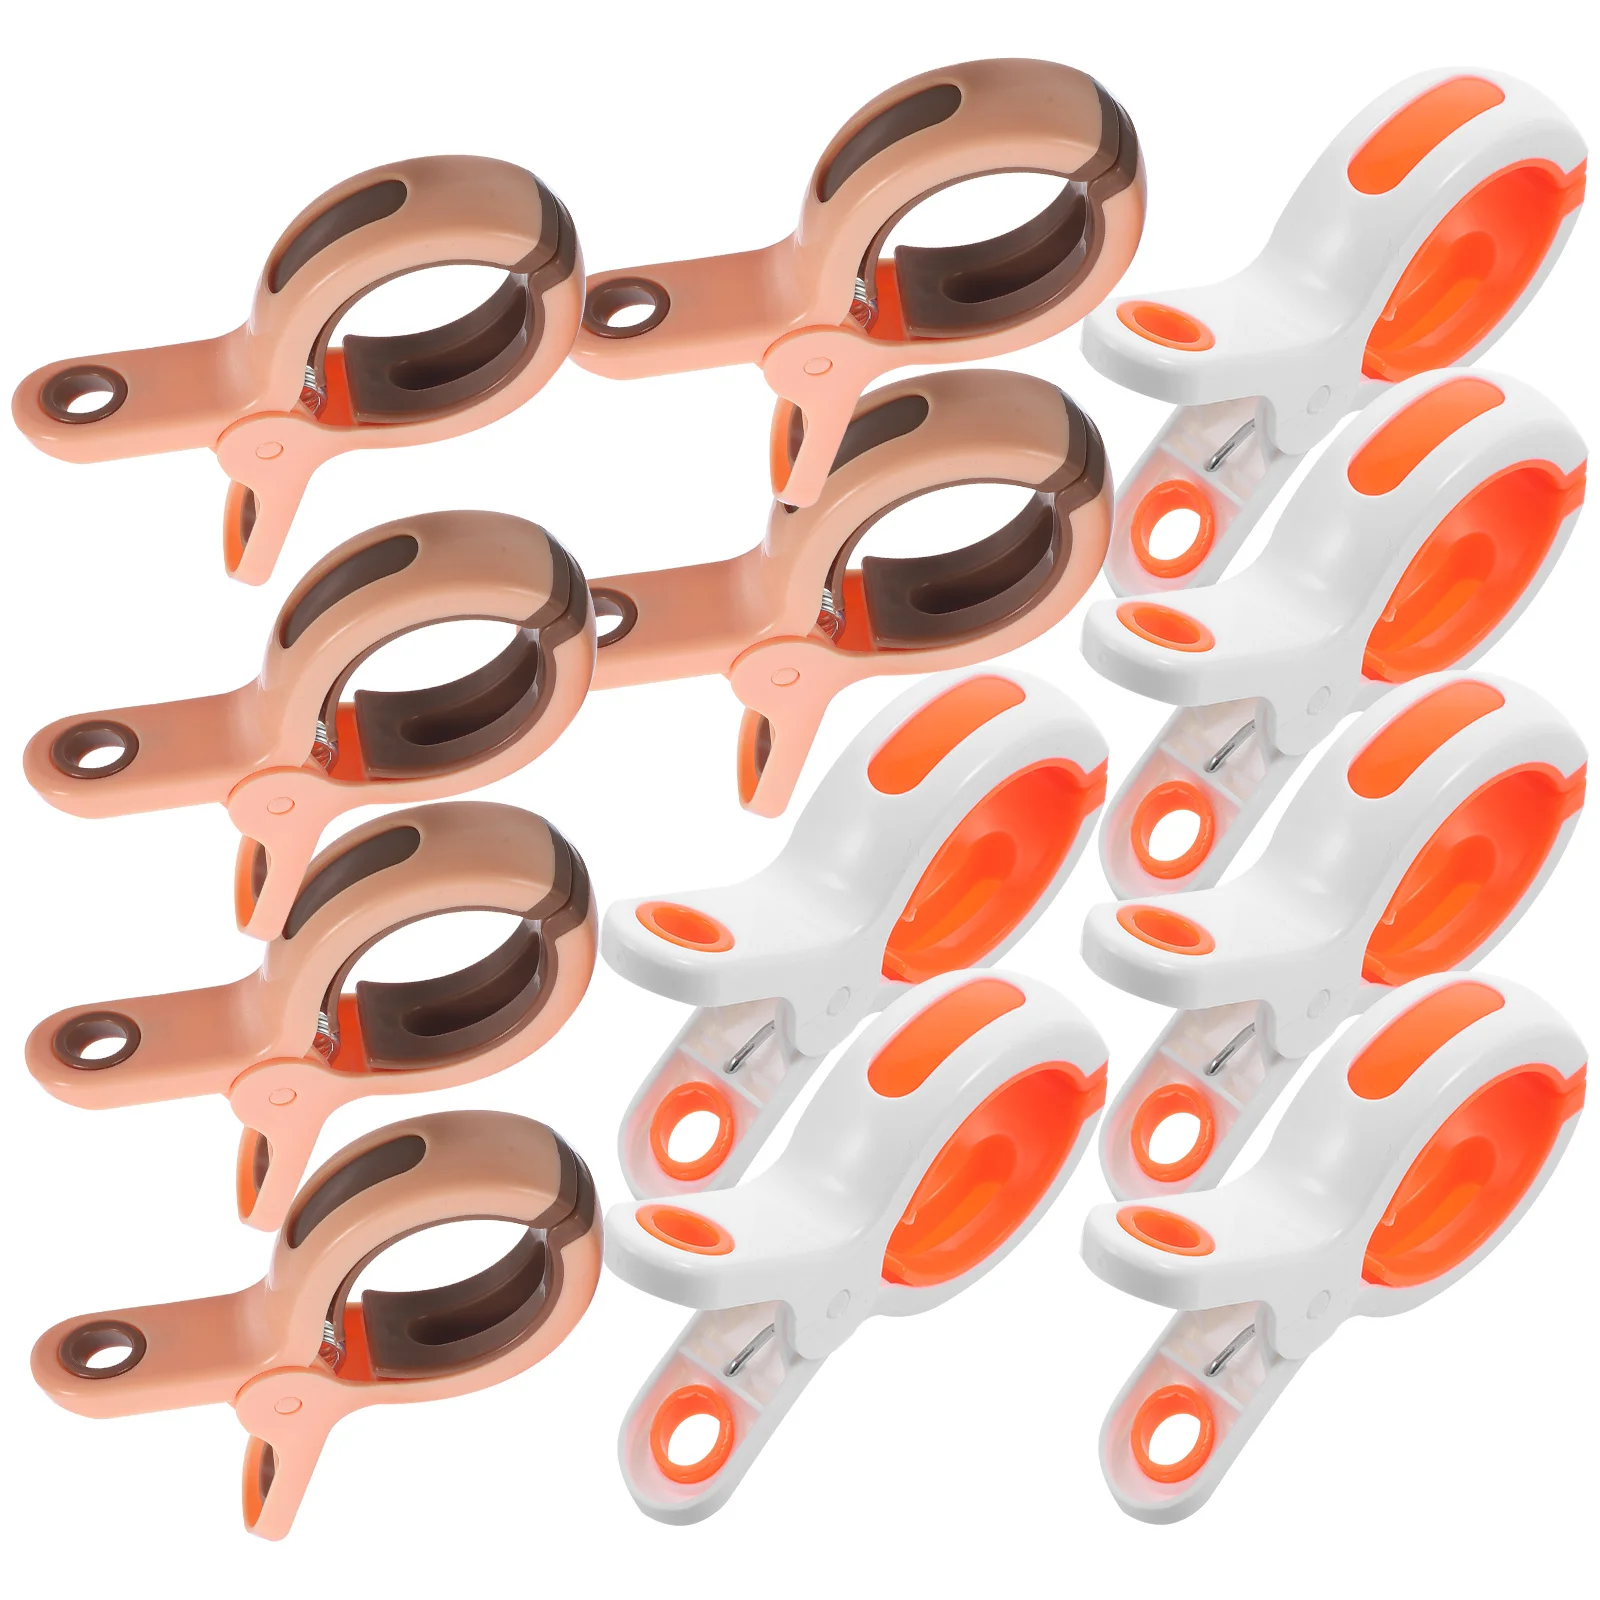 

12 Pcs Clothespin Beach Chair Holders Towel Clip Clips for Chairs Cruise Abs Towels and